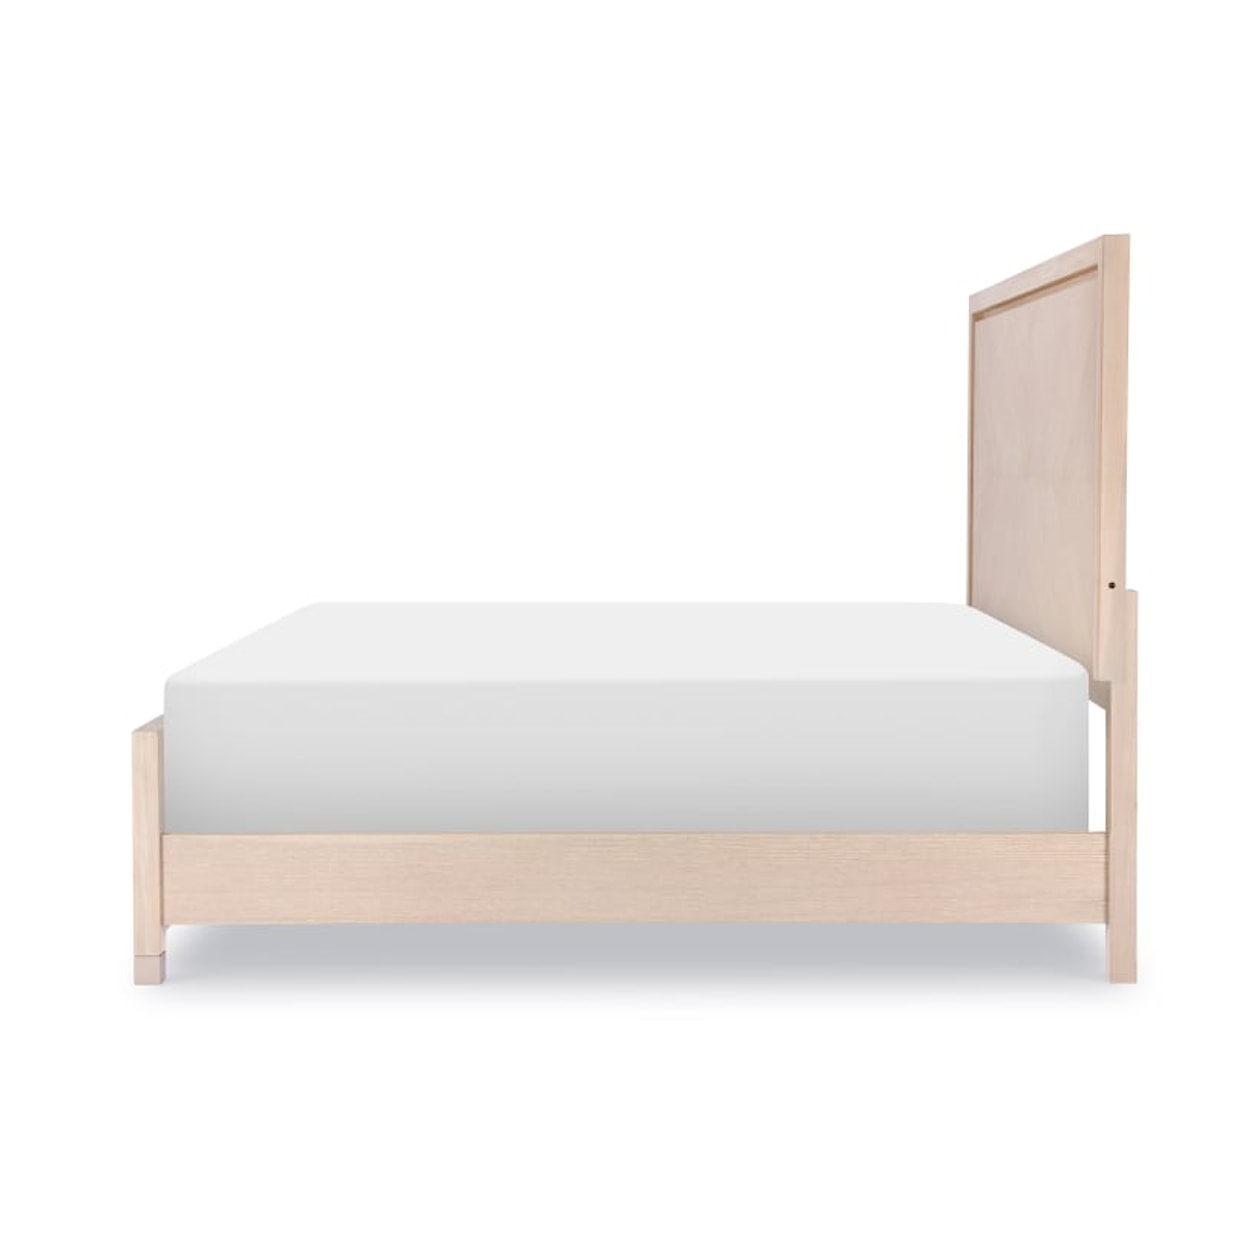 Legacy Classic Bliss Panel Bed